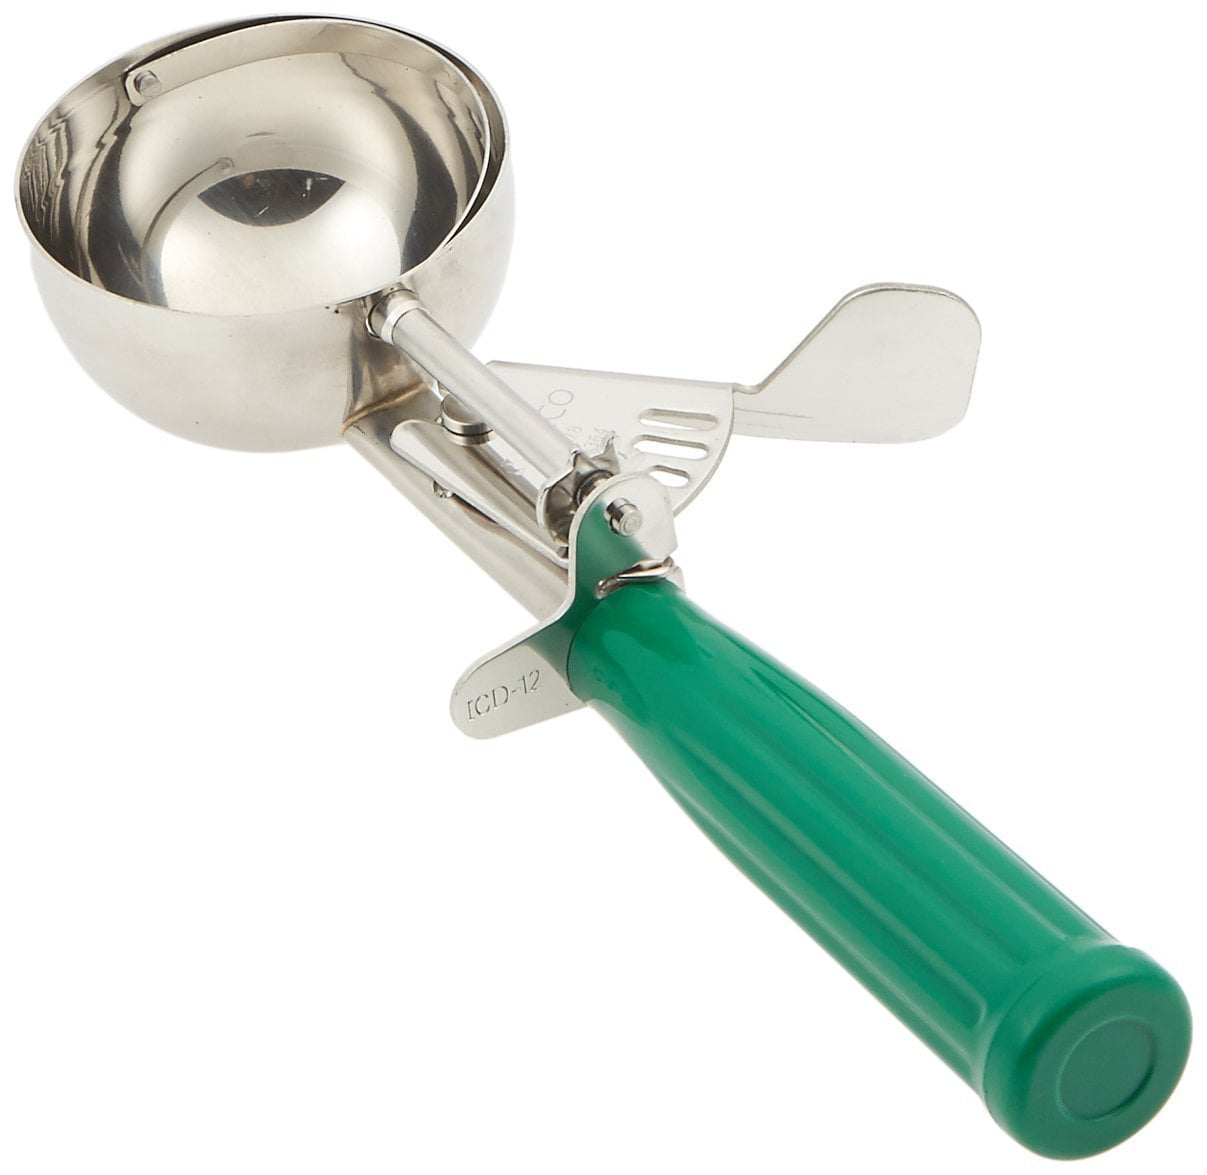 TigerChef TC-20559 Ice Cream Scoop Disher, Stainless Steel Scoop, NSF Certified